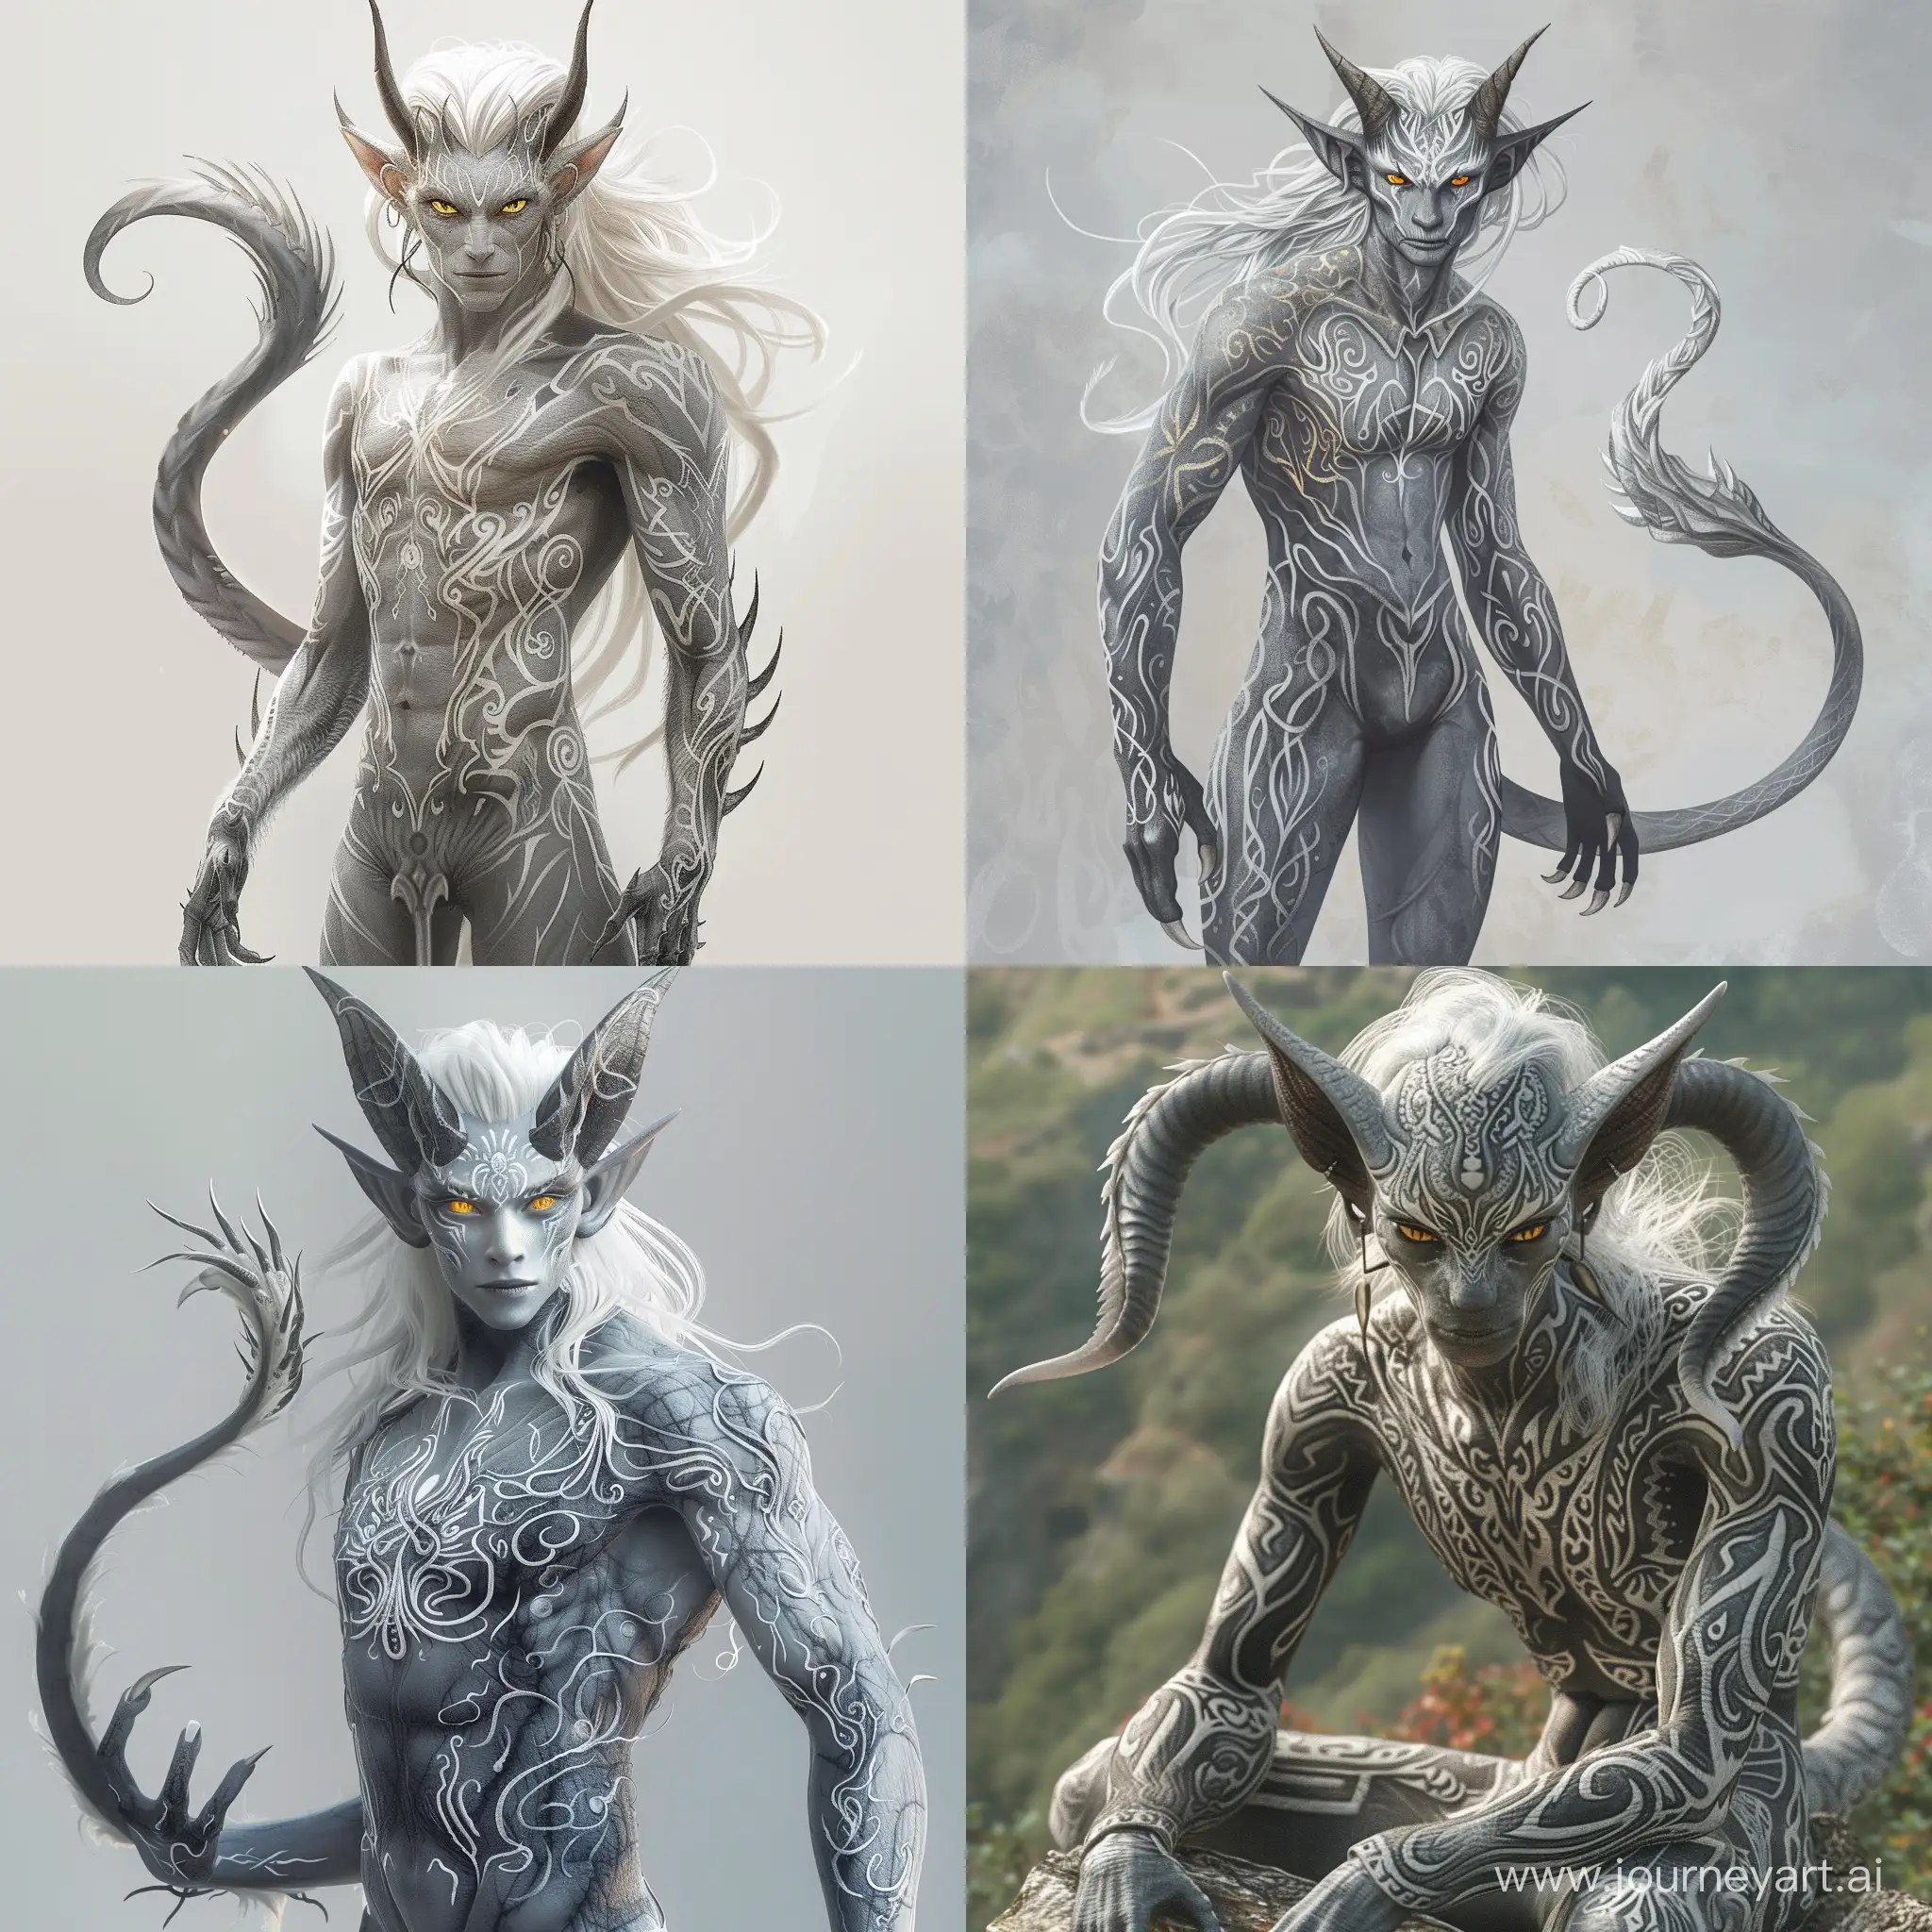 Male humanoid with androgynous, slender body. Grey skin. White intricate markings. Long pointy ears. Bright yellow eyes with slitted pupils. Curvy smooth horns. White wavy hair. Long grey tail. Hands and legs with claws..